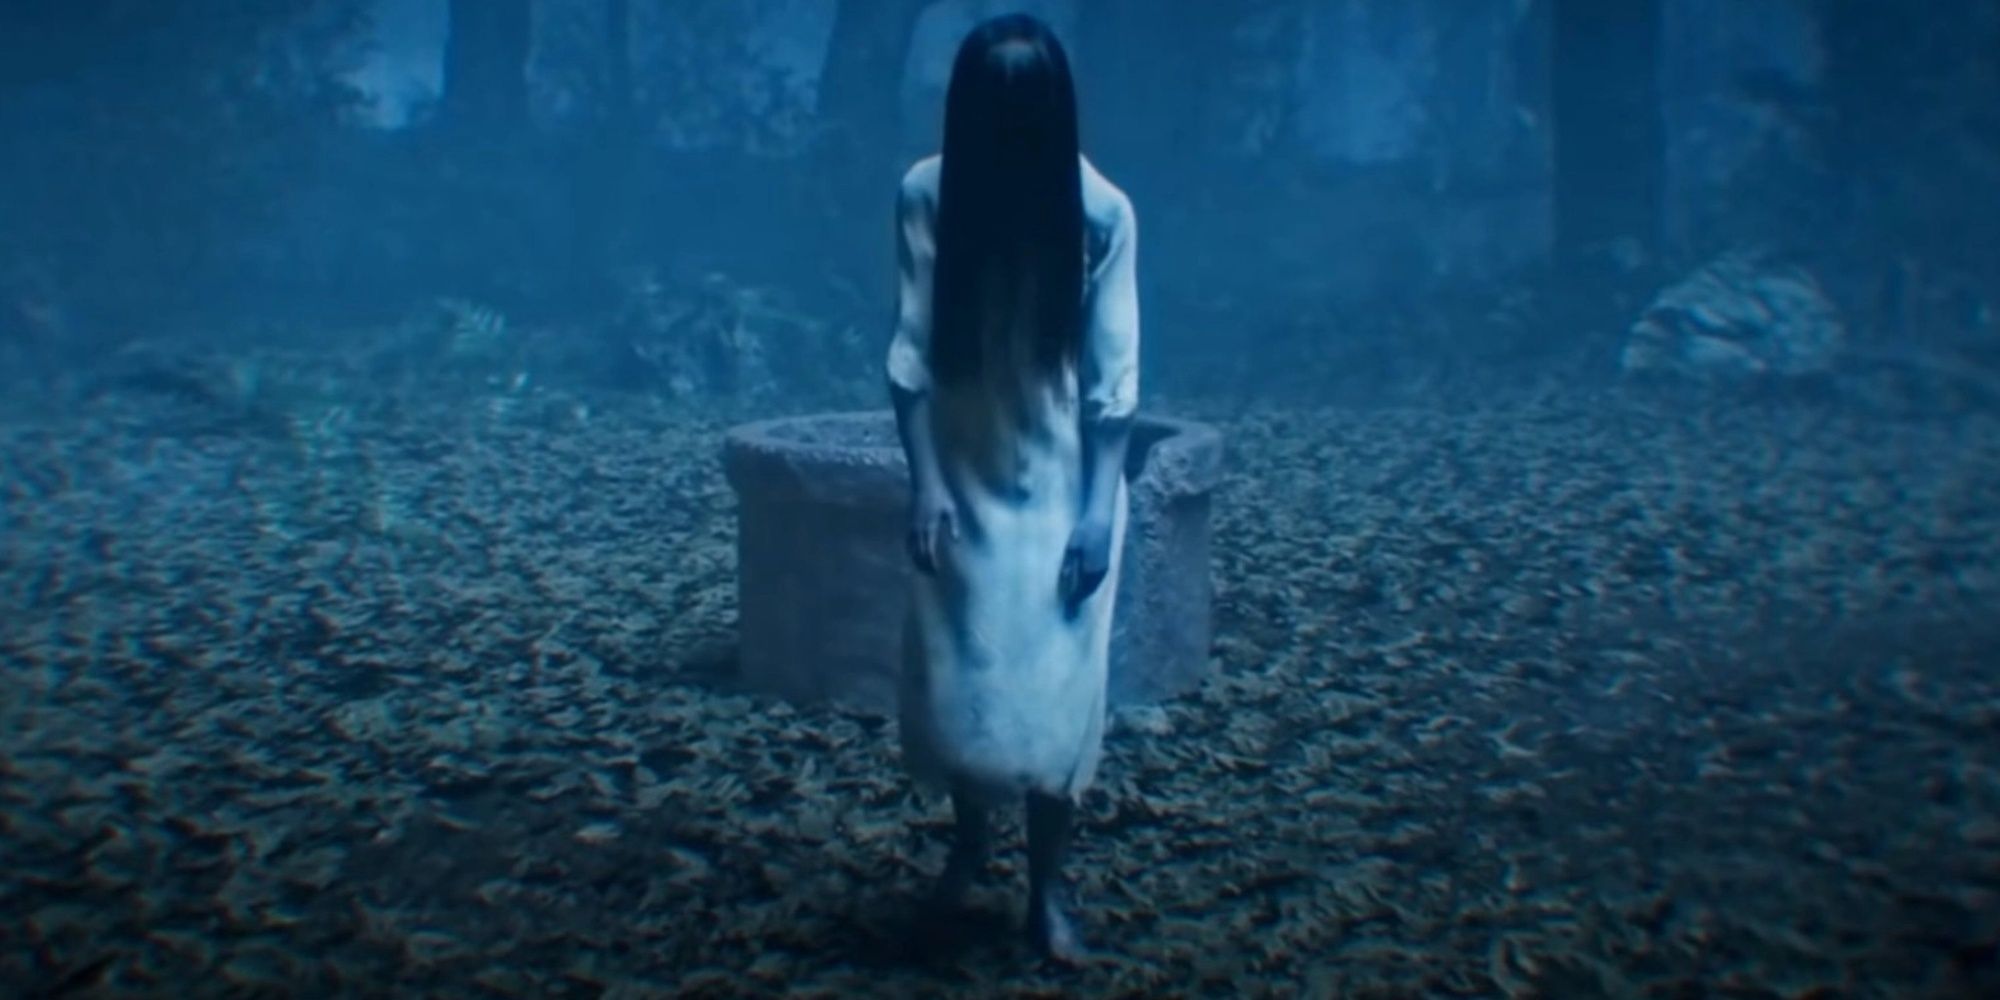 Dead By Daylight: Sadako Killer Character by the well